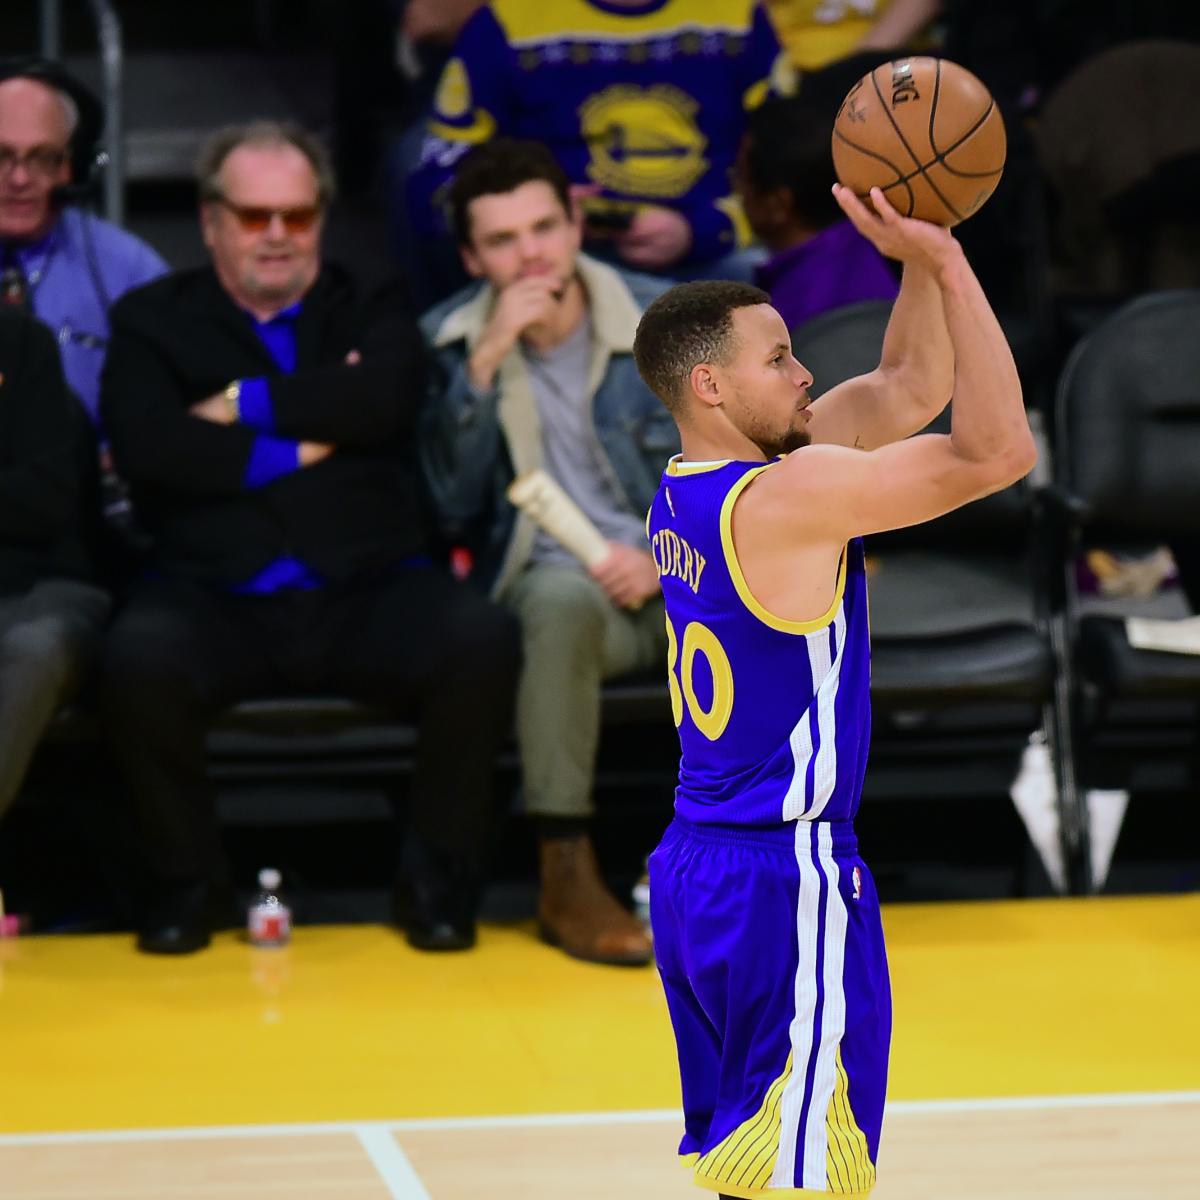 Steph Curry's Streak of 157 Consecutive Games with 3Pointer Snapped vs